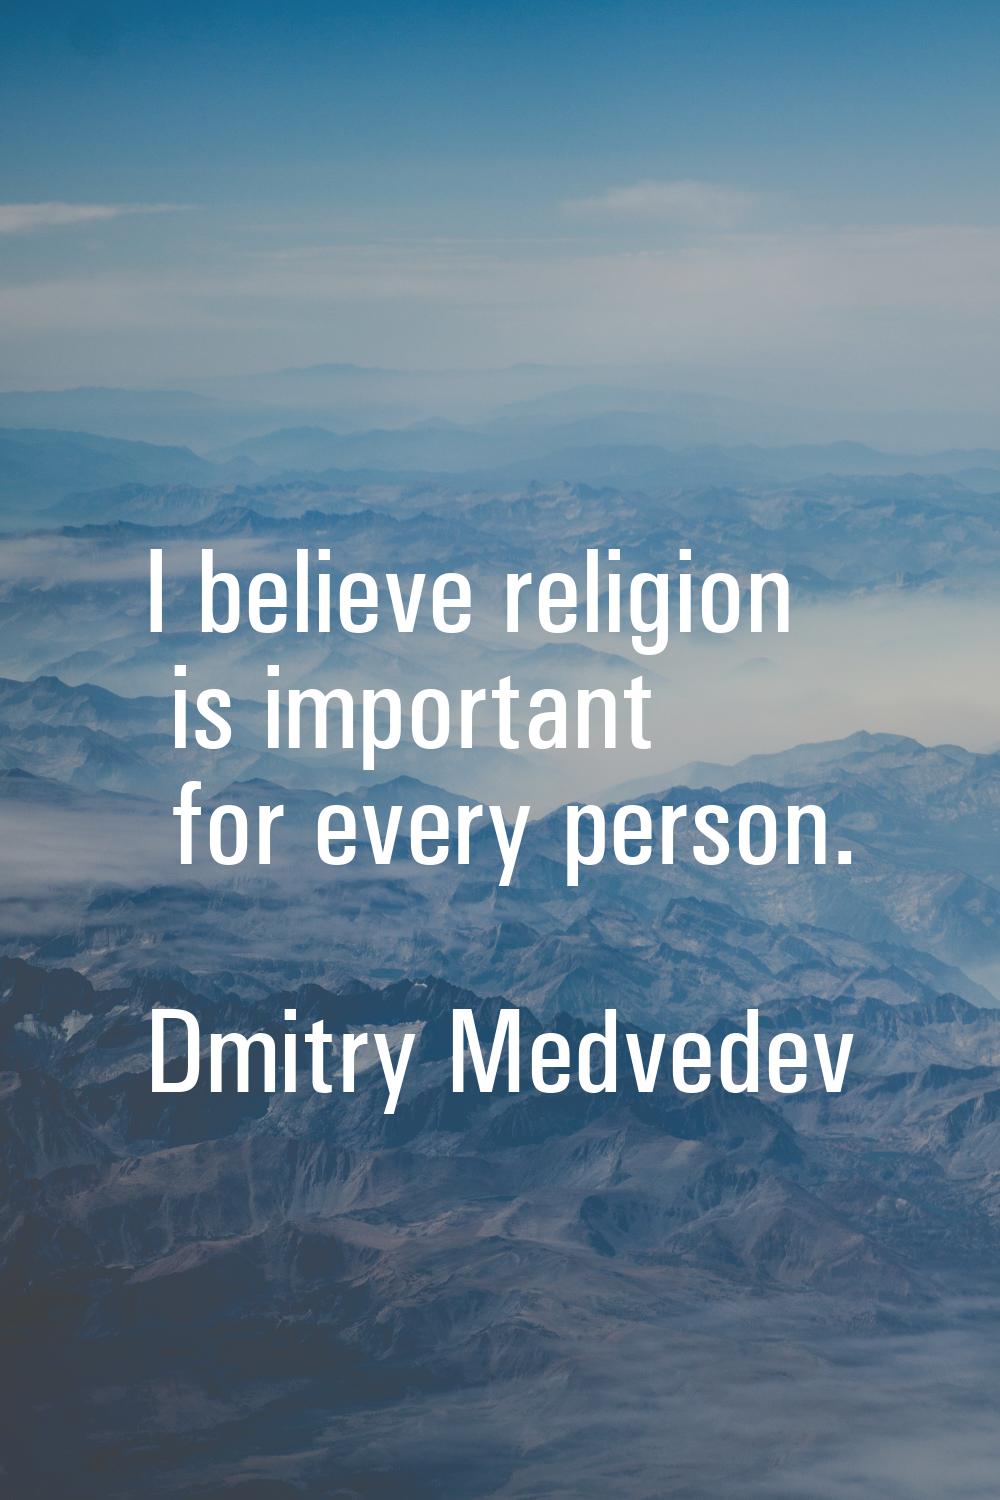 I believe religion is important for every person.